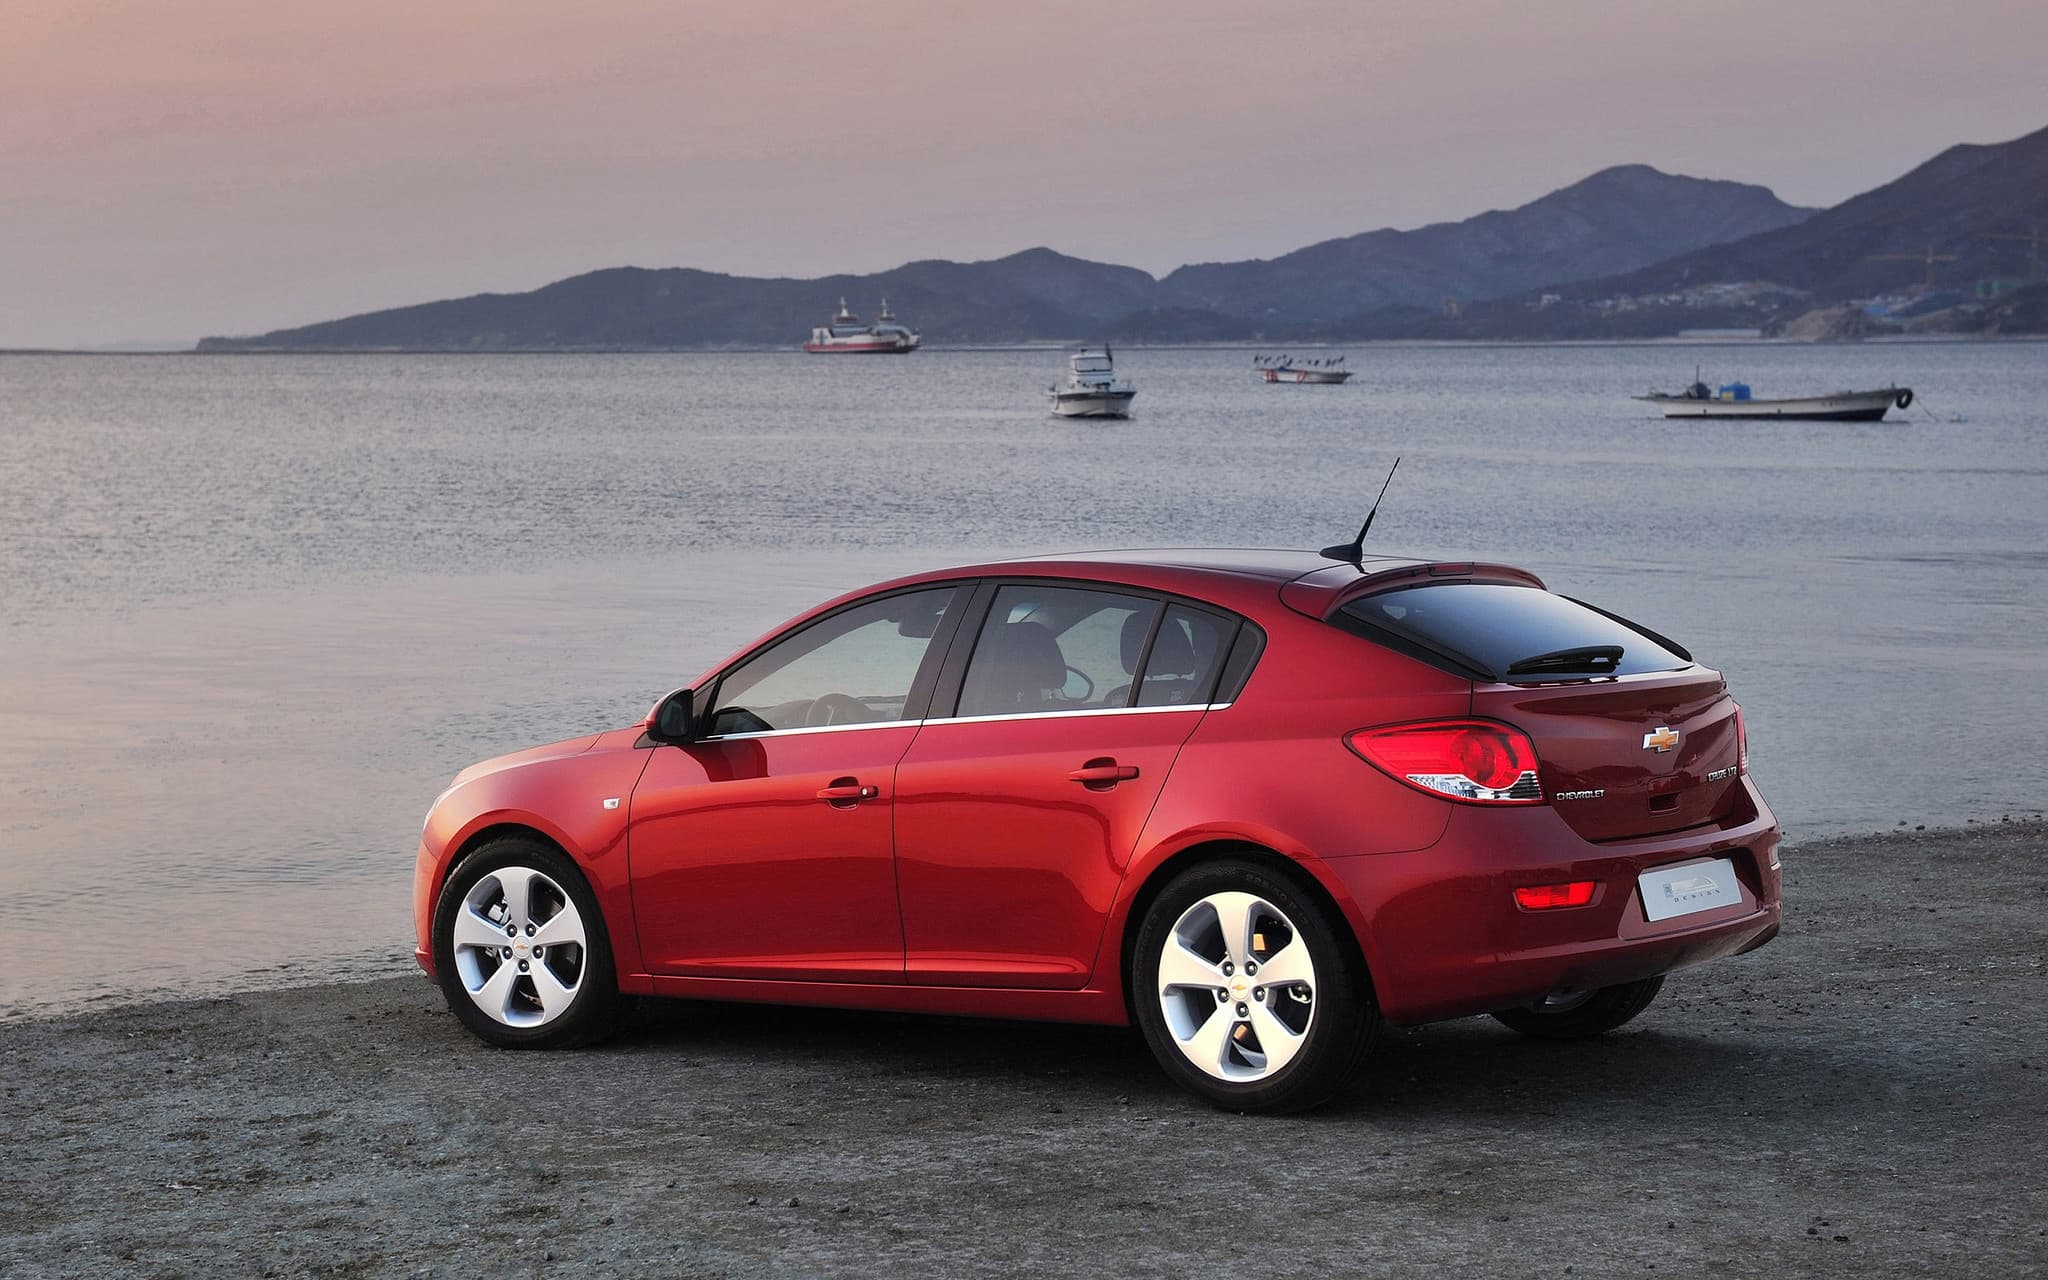 Chevrolet Cruze wallpaper HD High Quality free Download